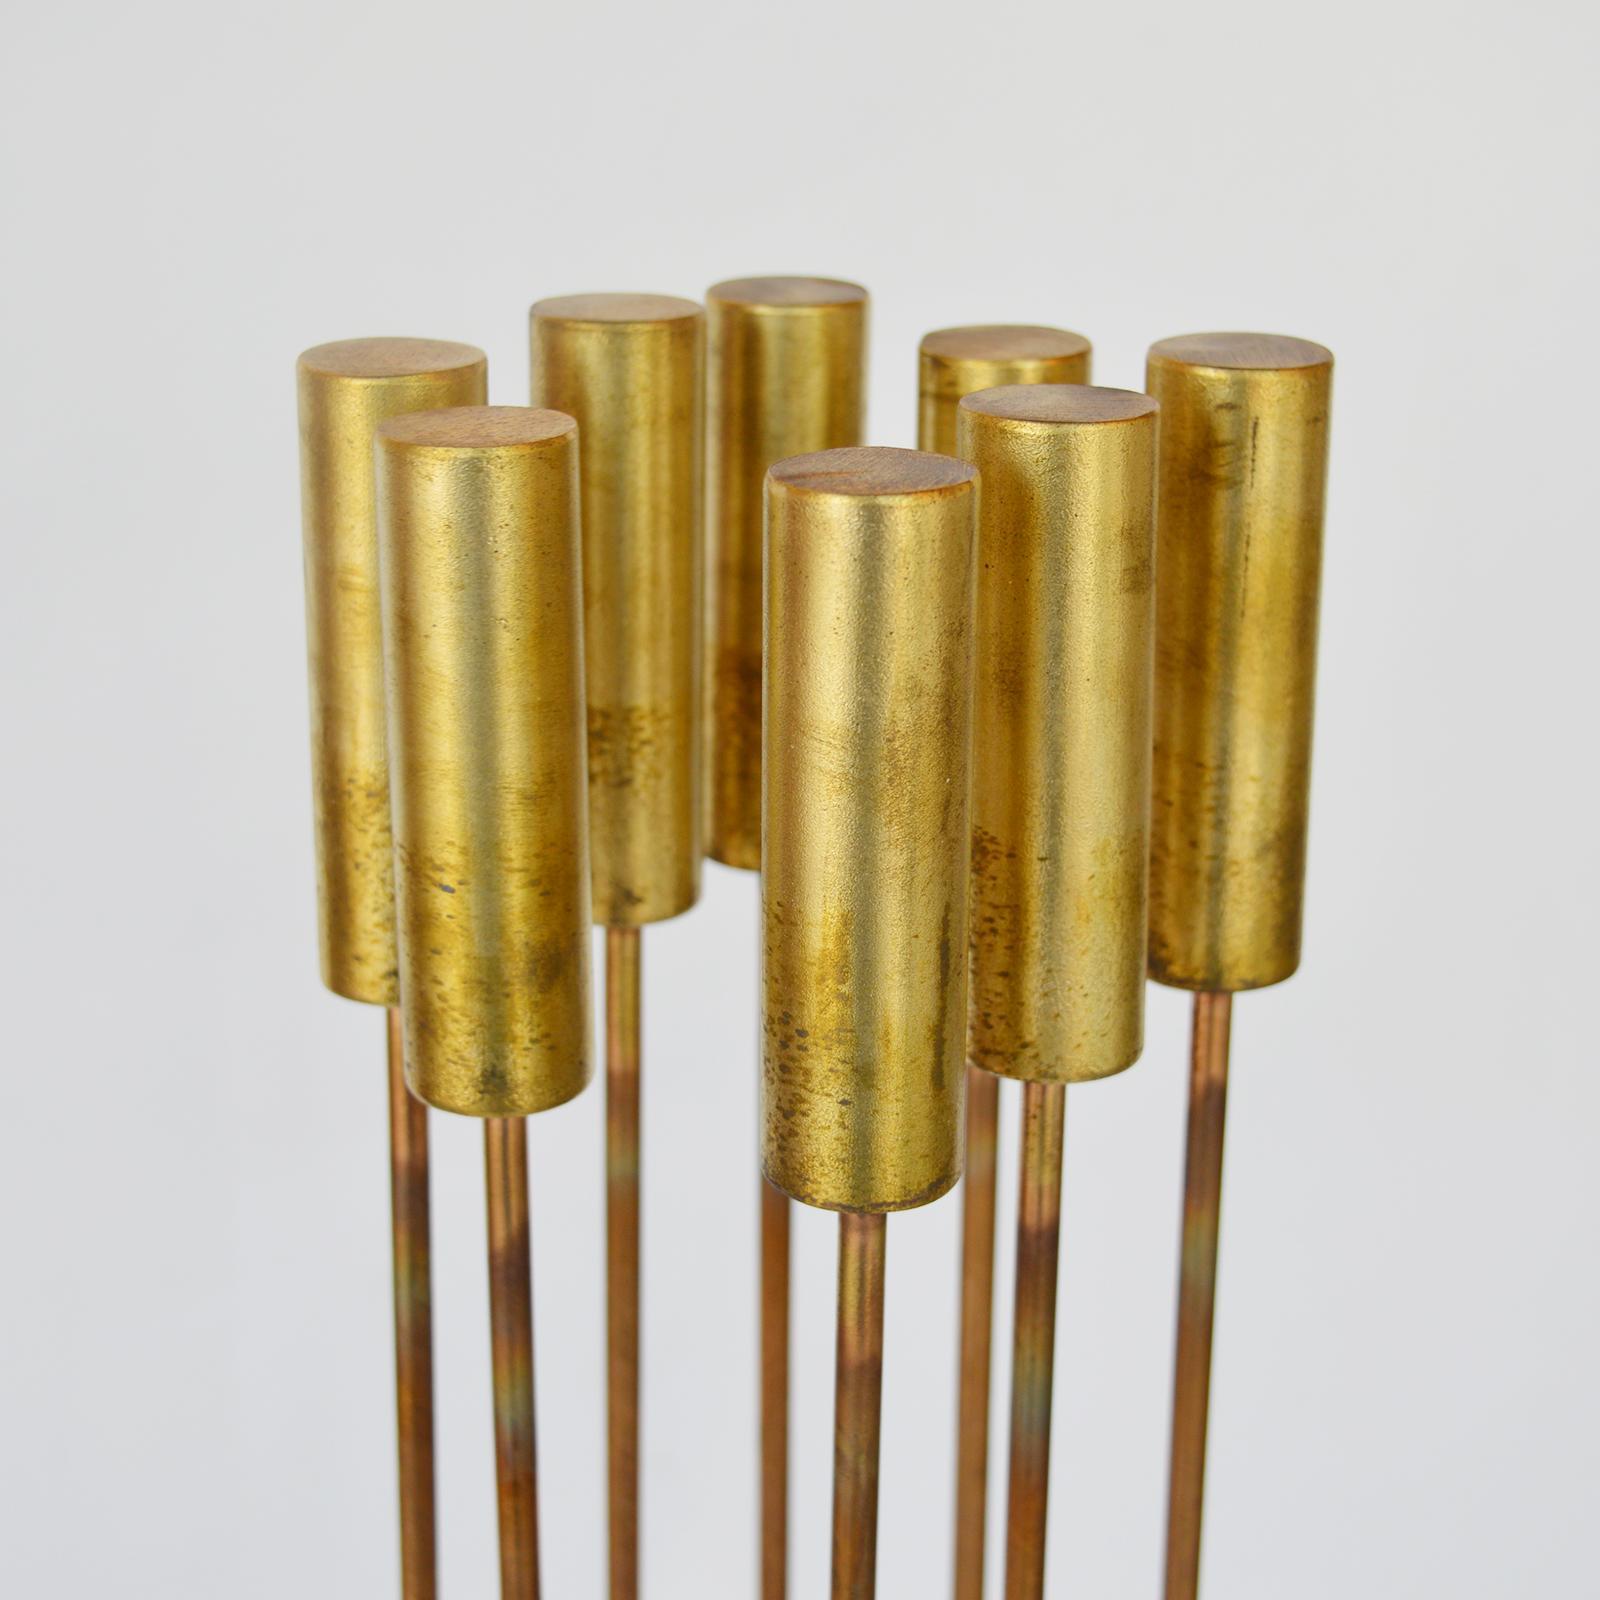 Val Bertoia sounding sculpture B2398. Bronze and brass. United States / 20th century.